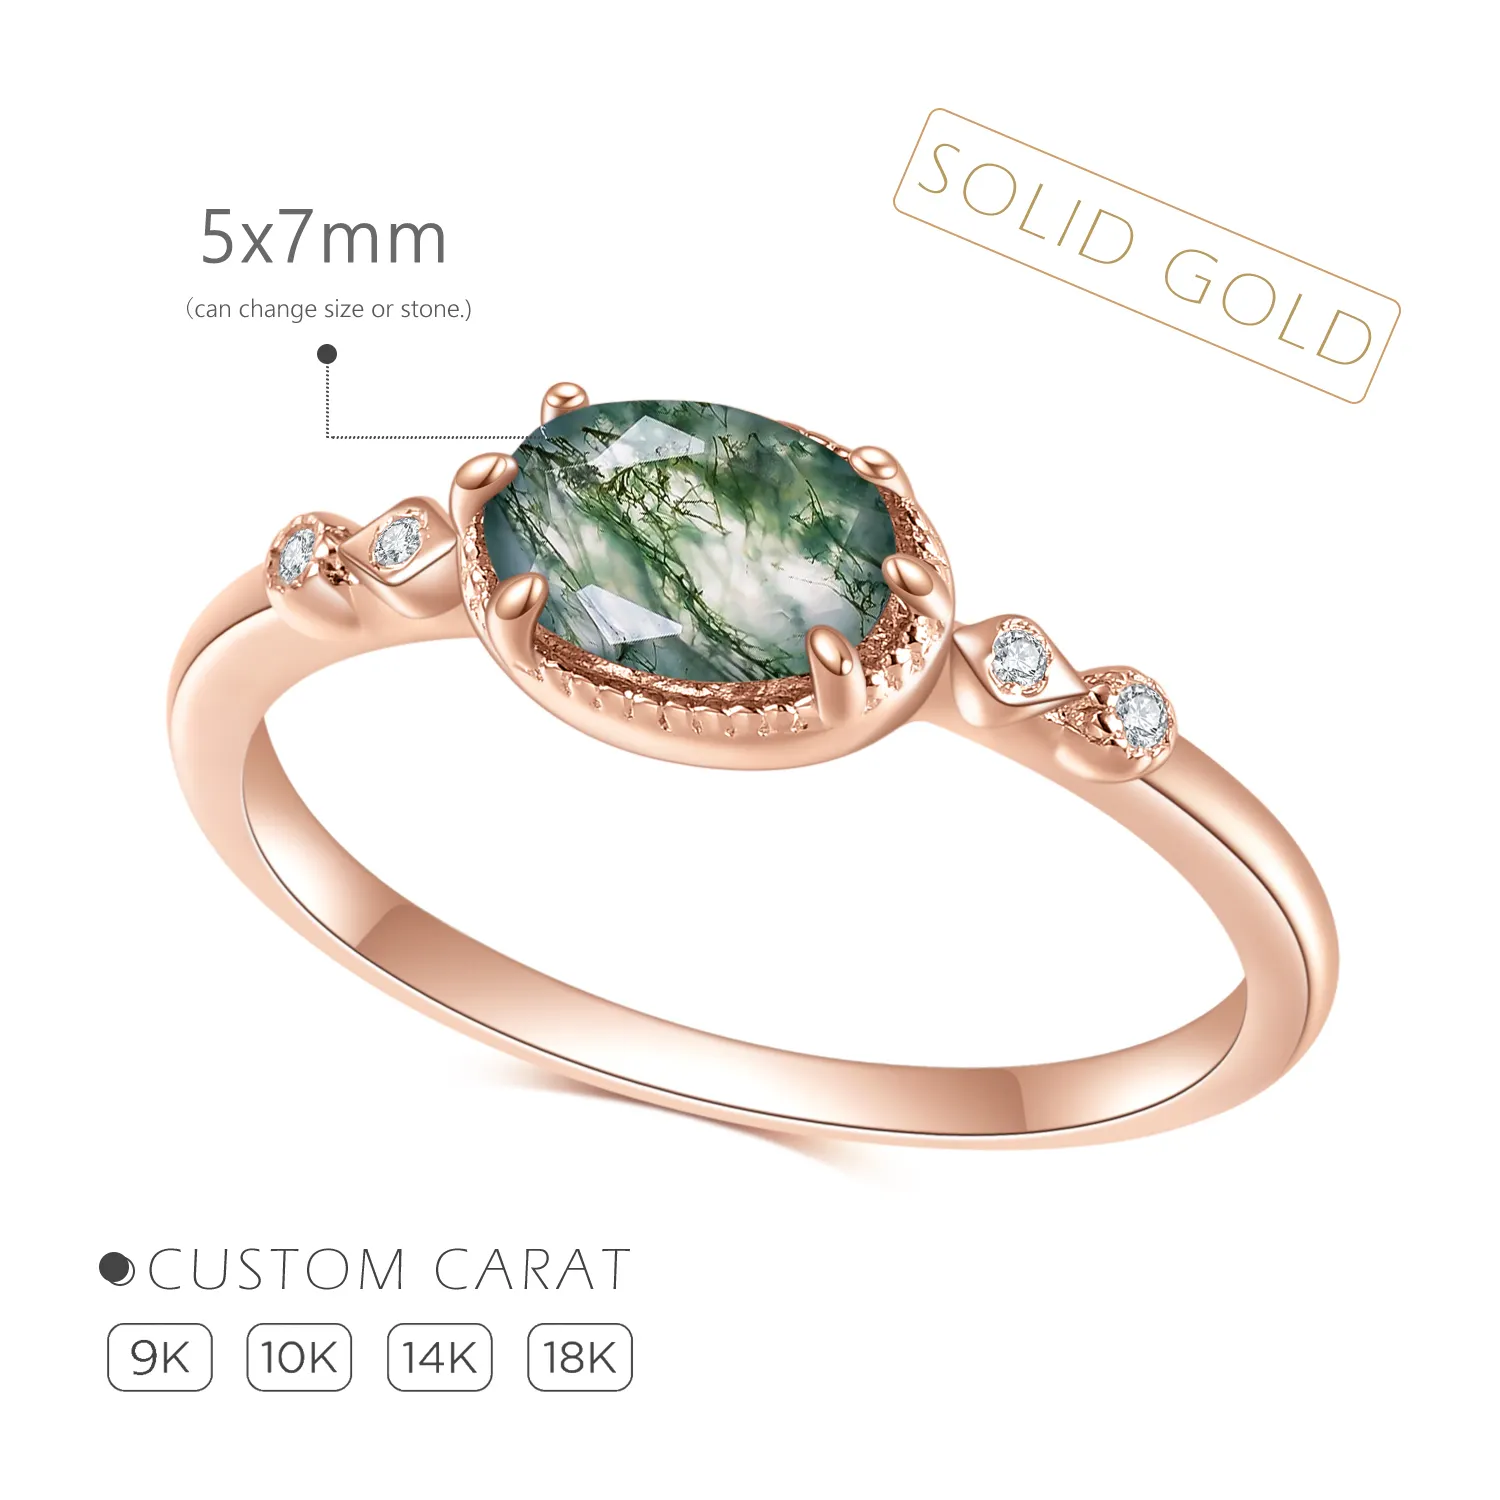 OL0899 Abiding Jewelry Custom 9K 10K 14K 18K Solid Gold Oval Cut 5x7mm Gemstone Moss Agate Ring Wholesale with Cubic Zirconia